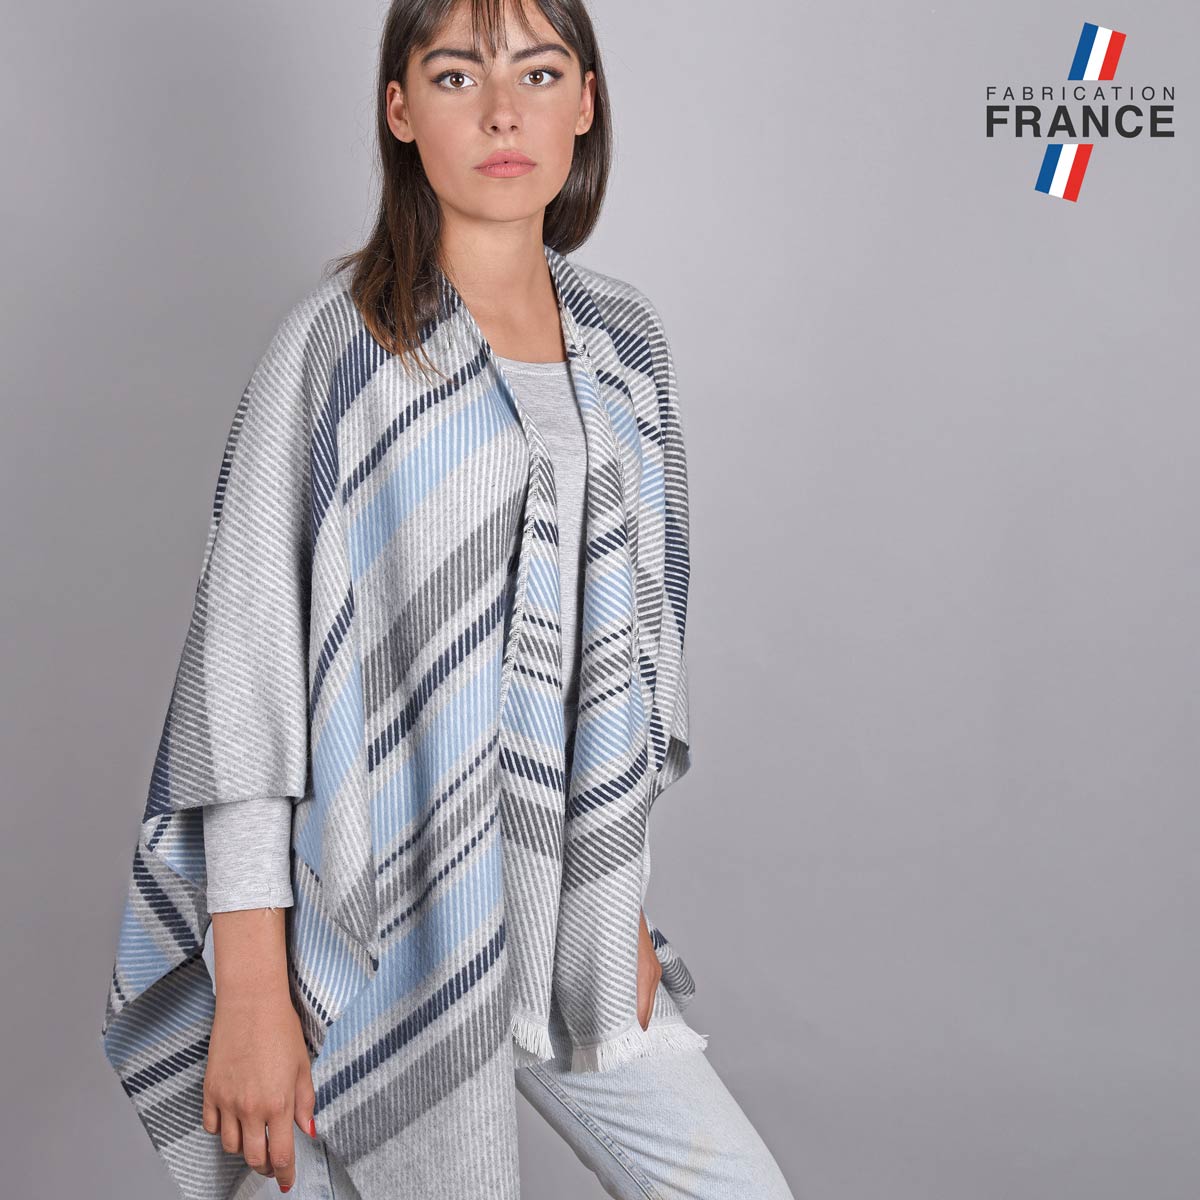 Poncho-rayures-fines-bleu-gris-clair-fabrication-francaise--AT-04814_W1-12FR